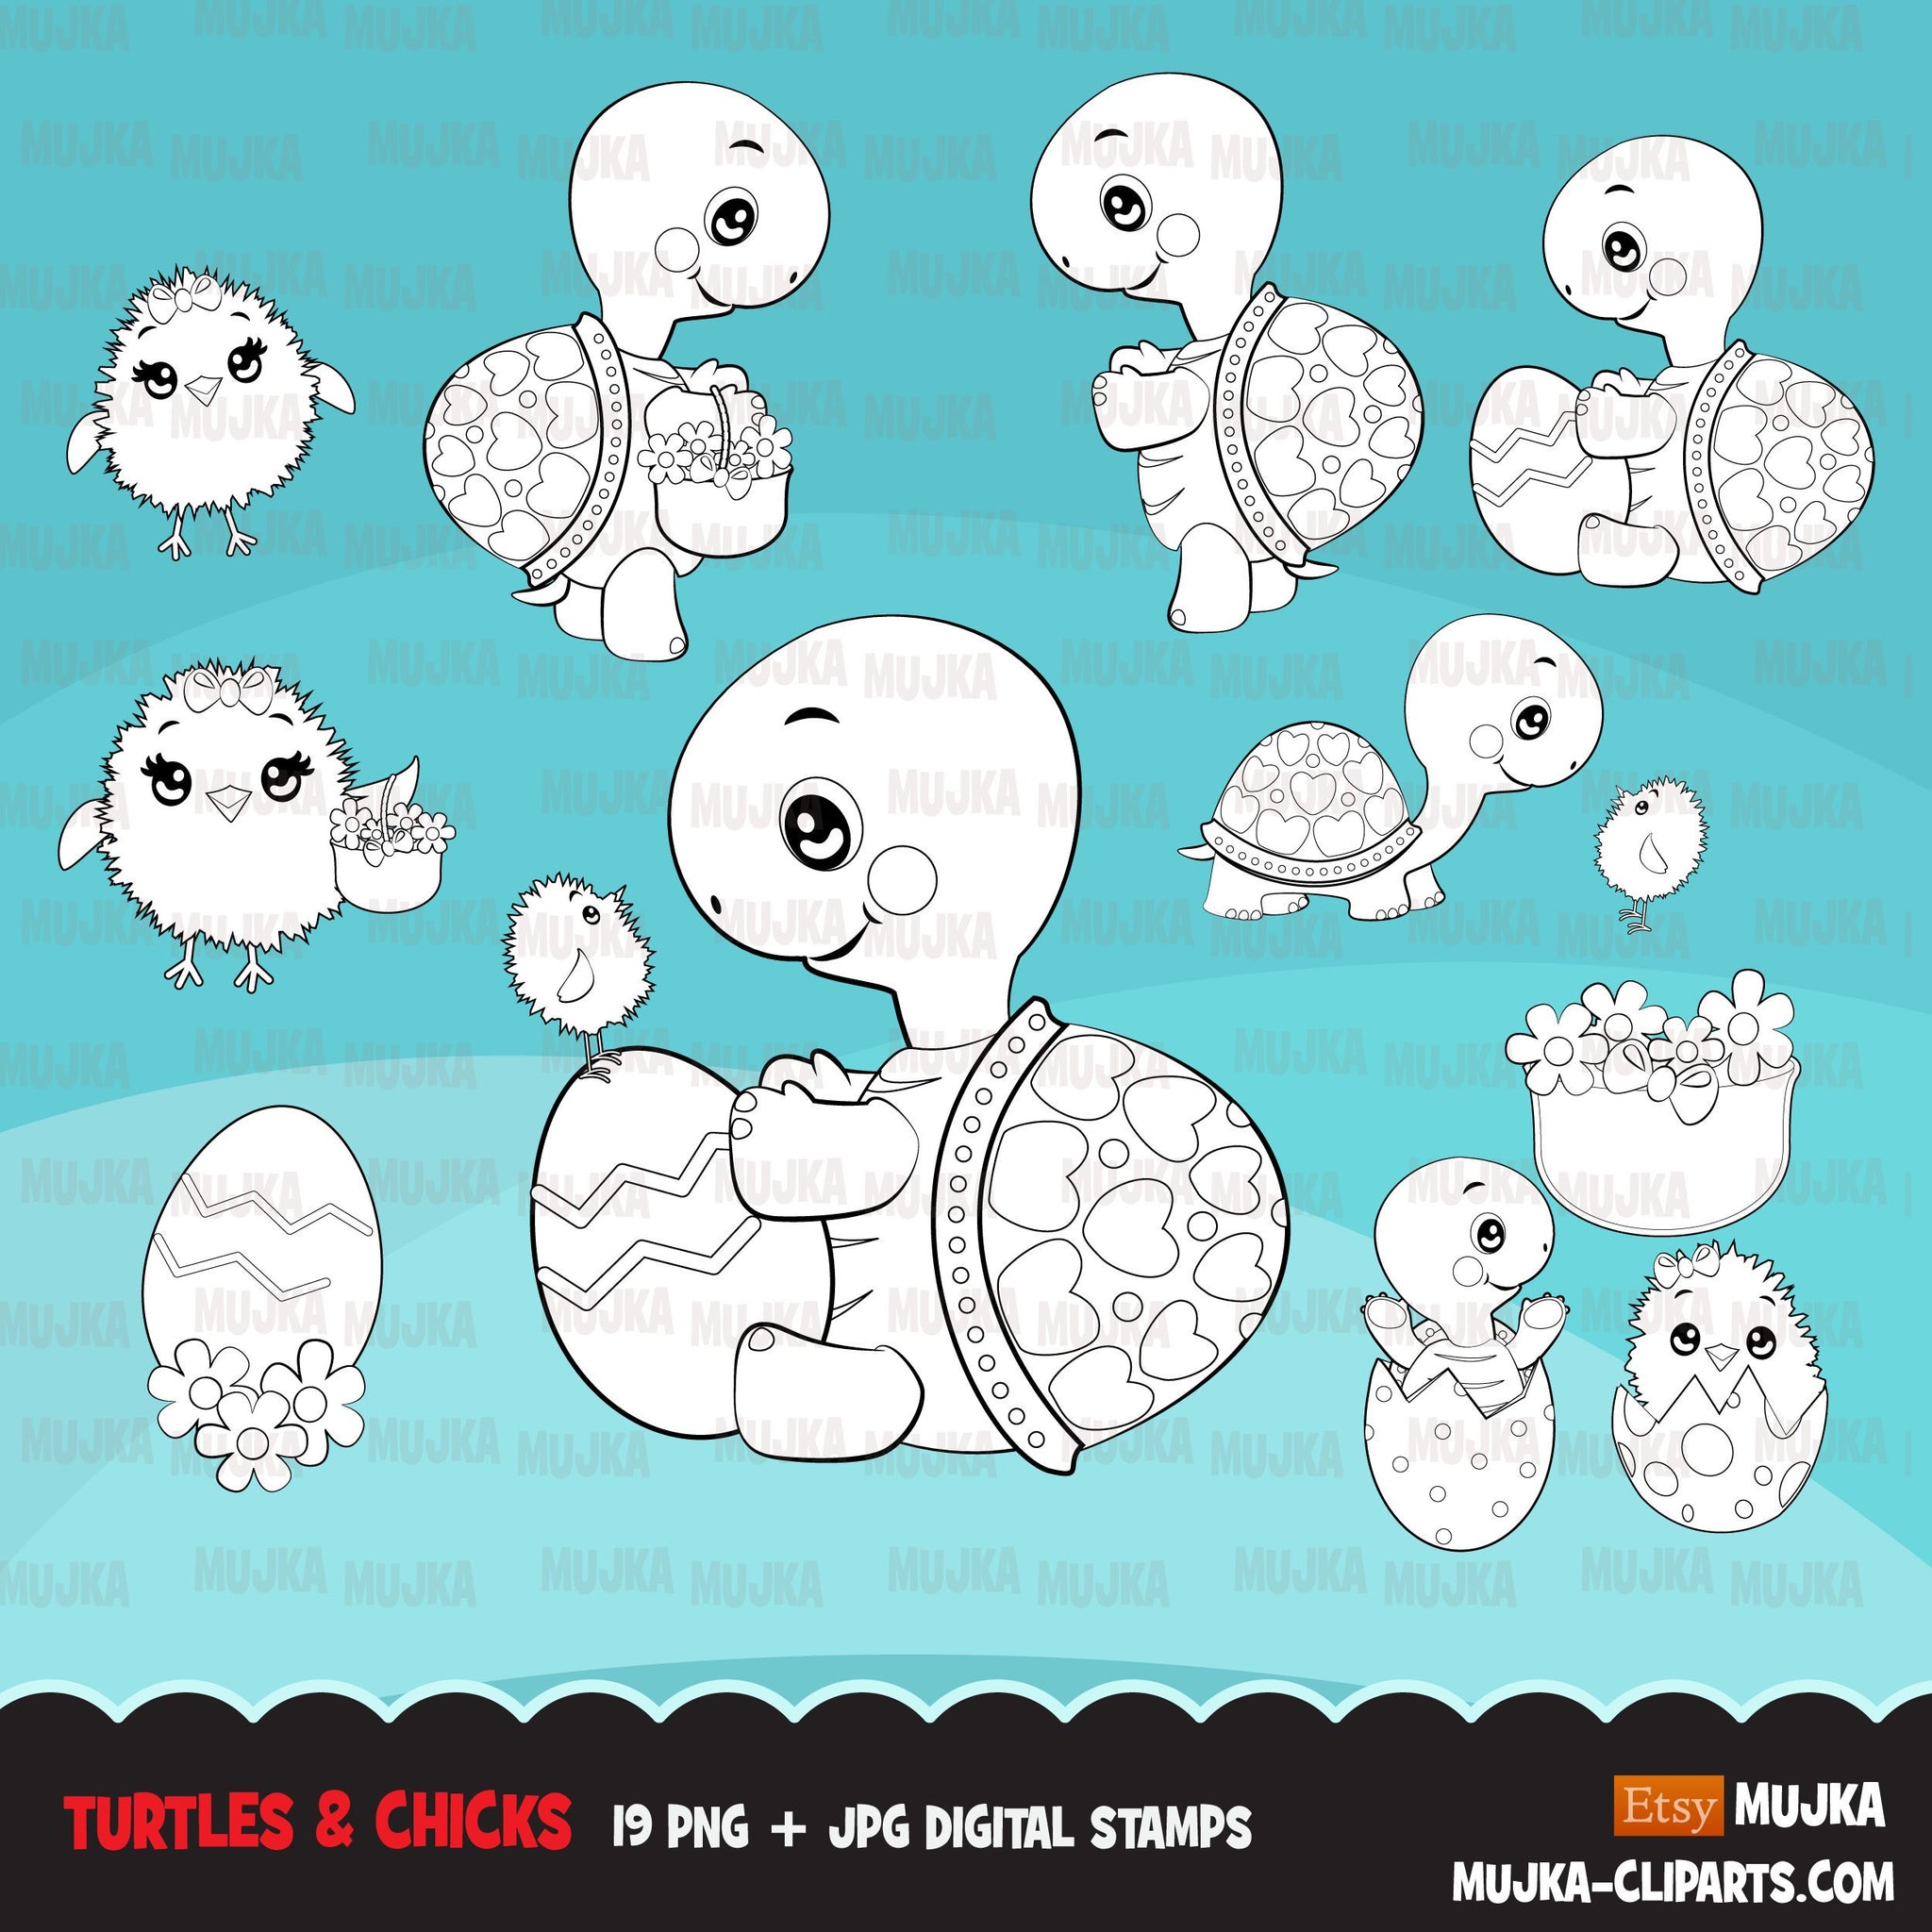 Turtles and Chicks Digital stamps, cute Easter animal graphics, coloring book black and white outline clip art